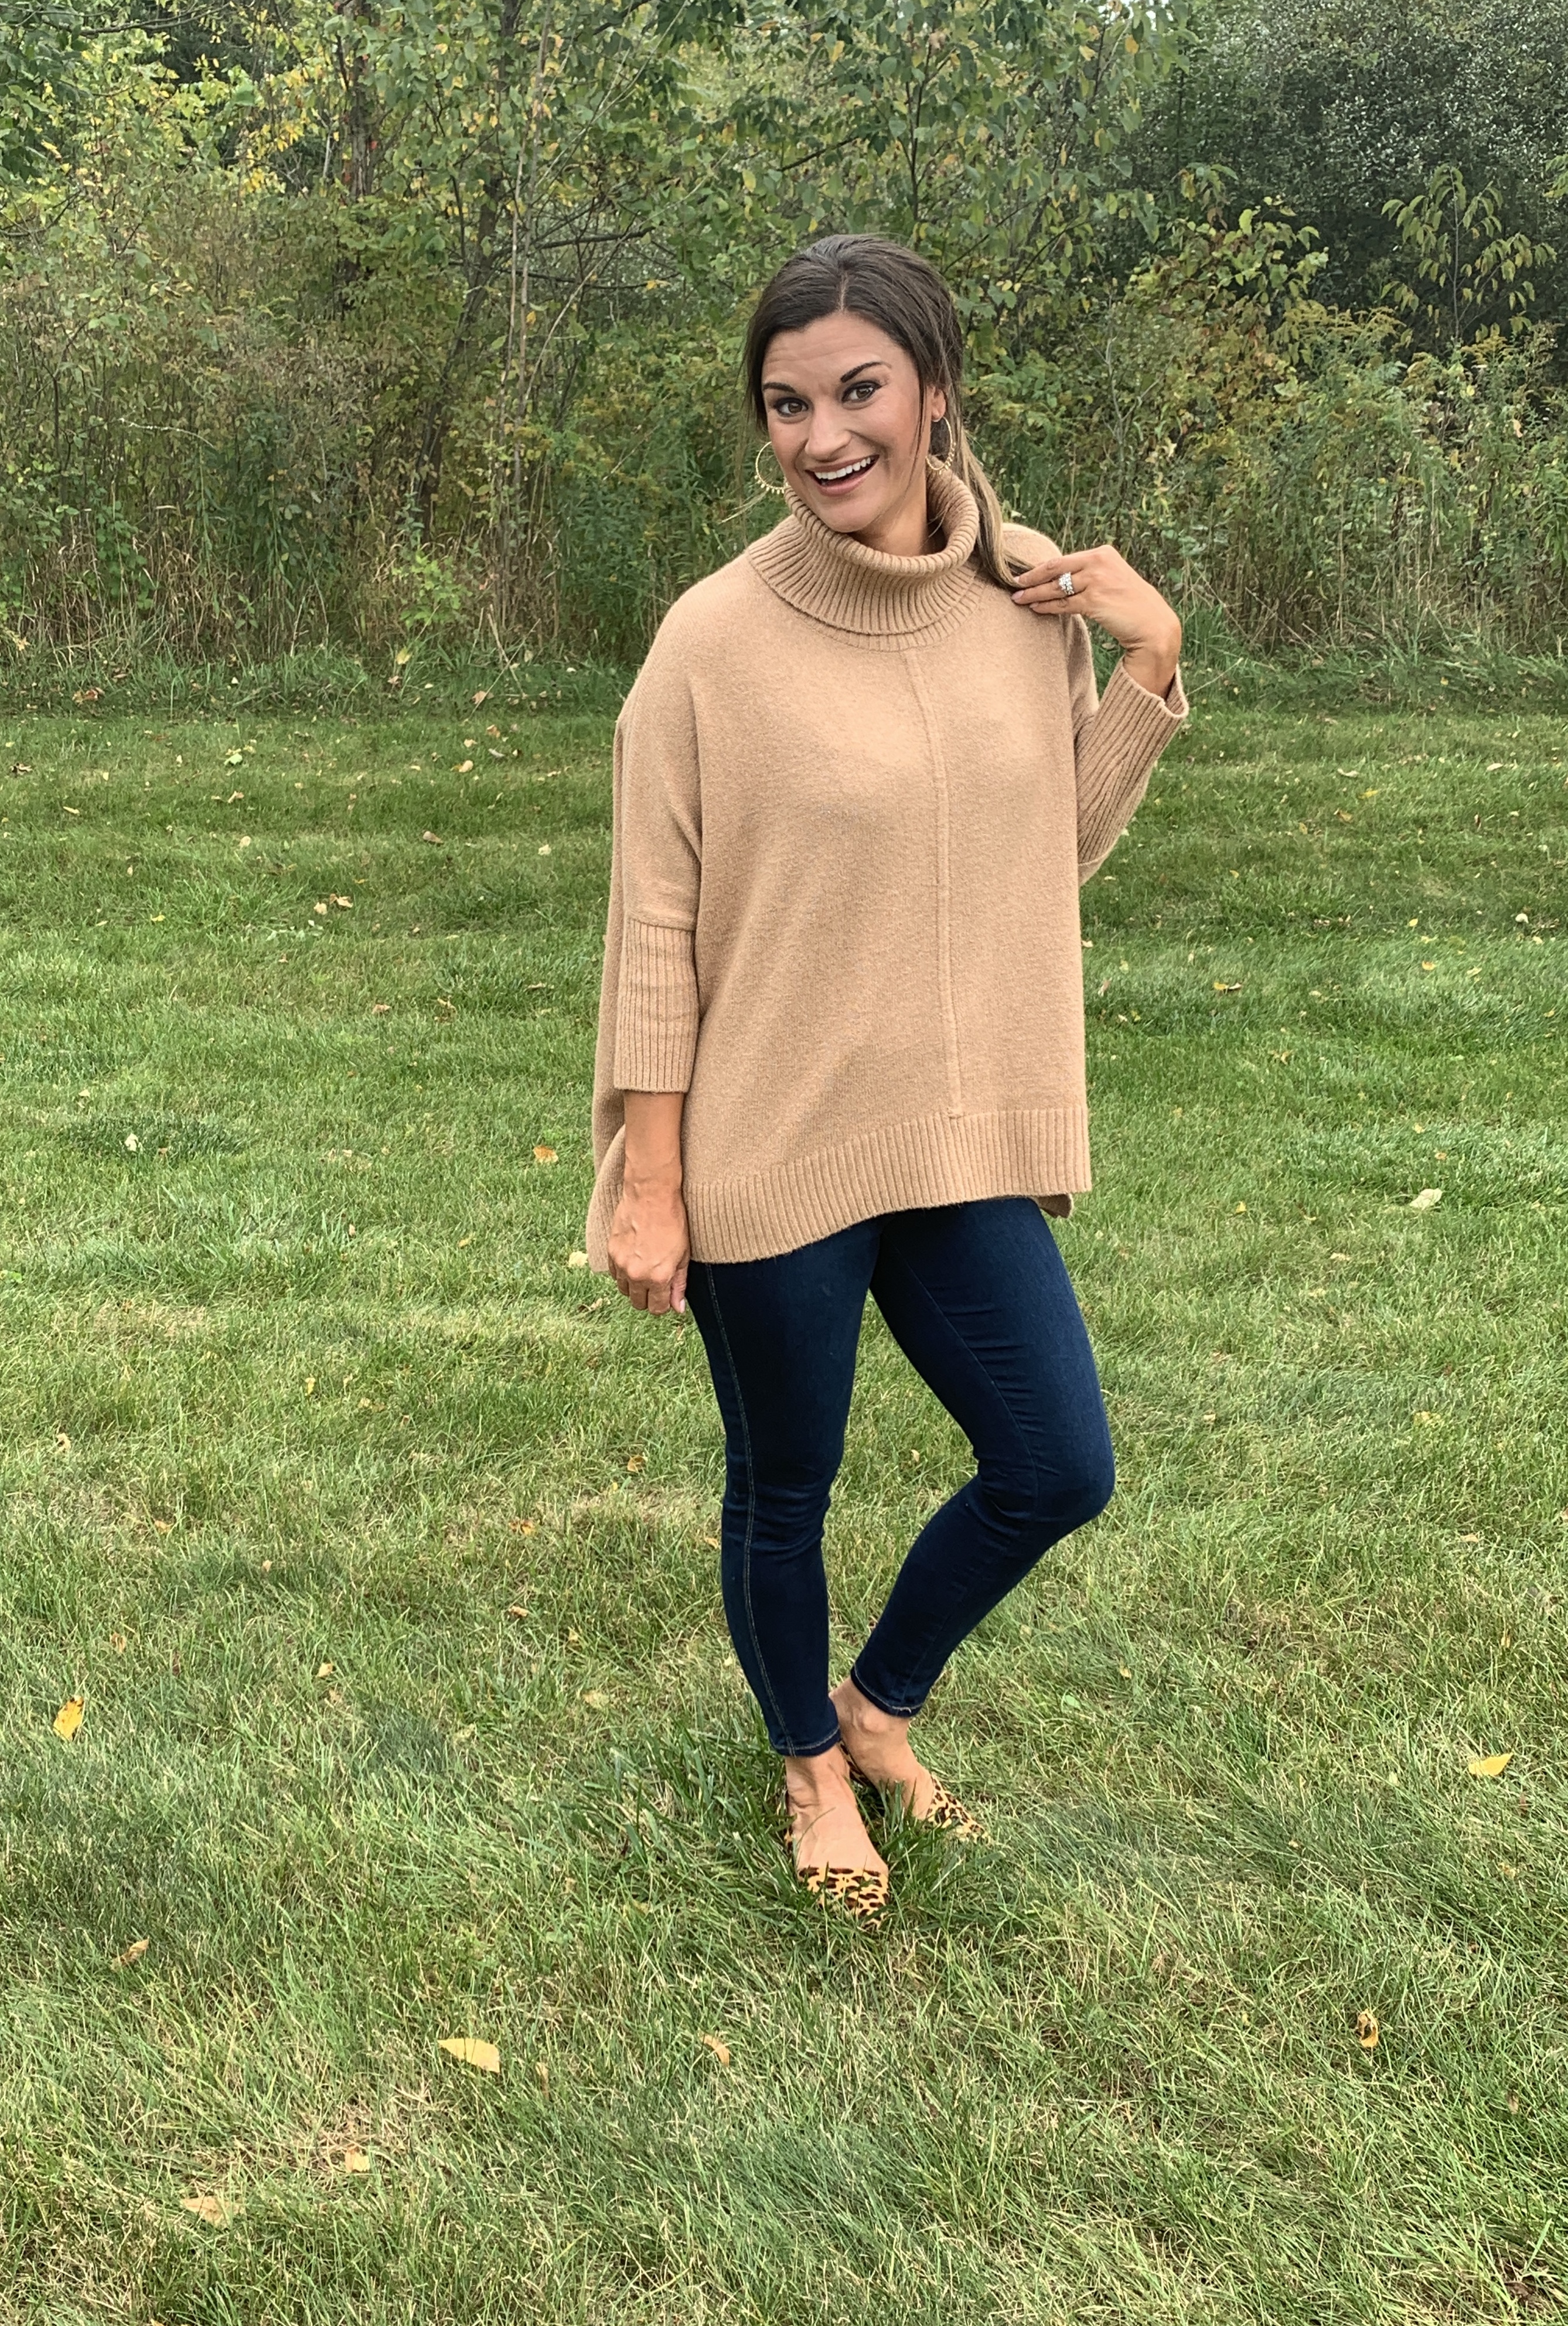 How to Wear One Tunic Sweater Ten Ways – Just Posted